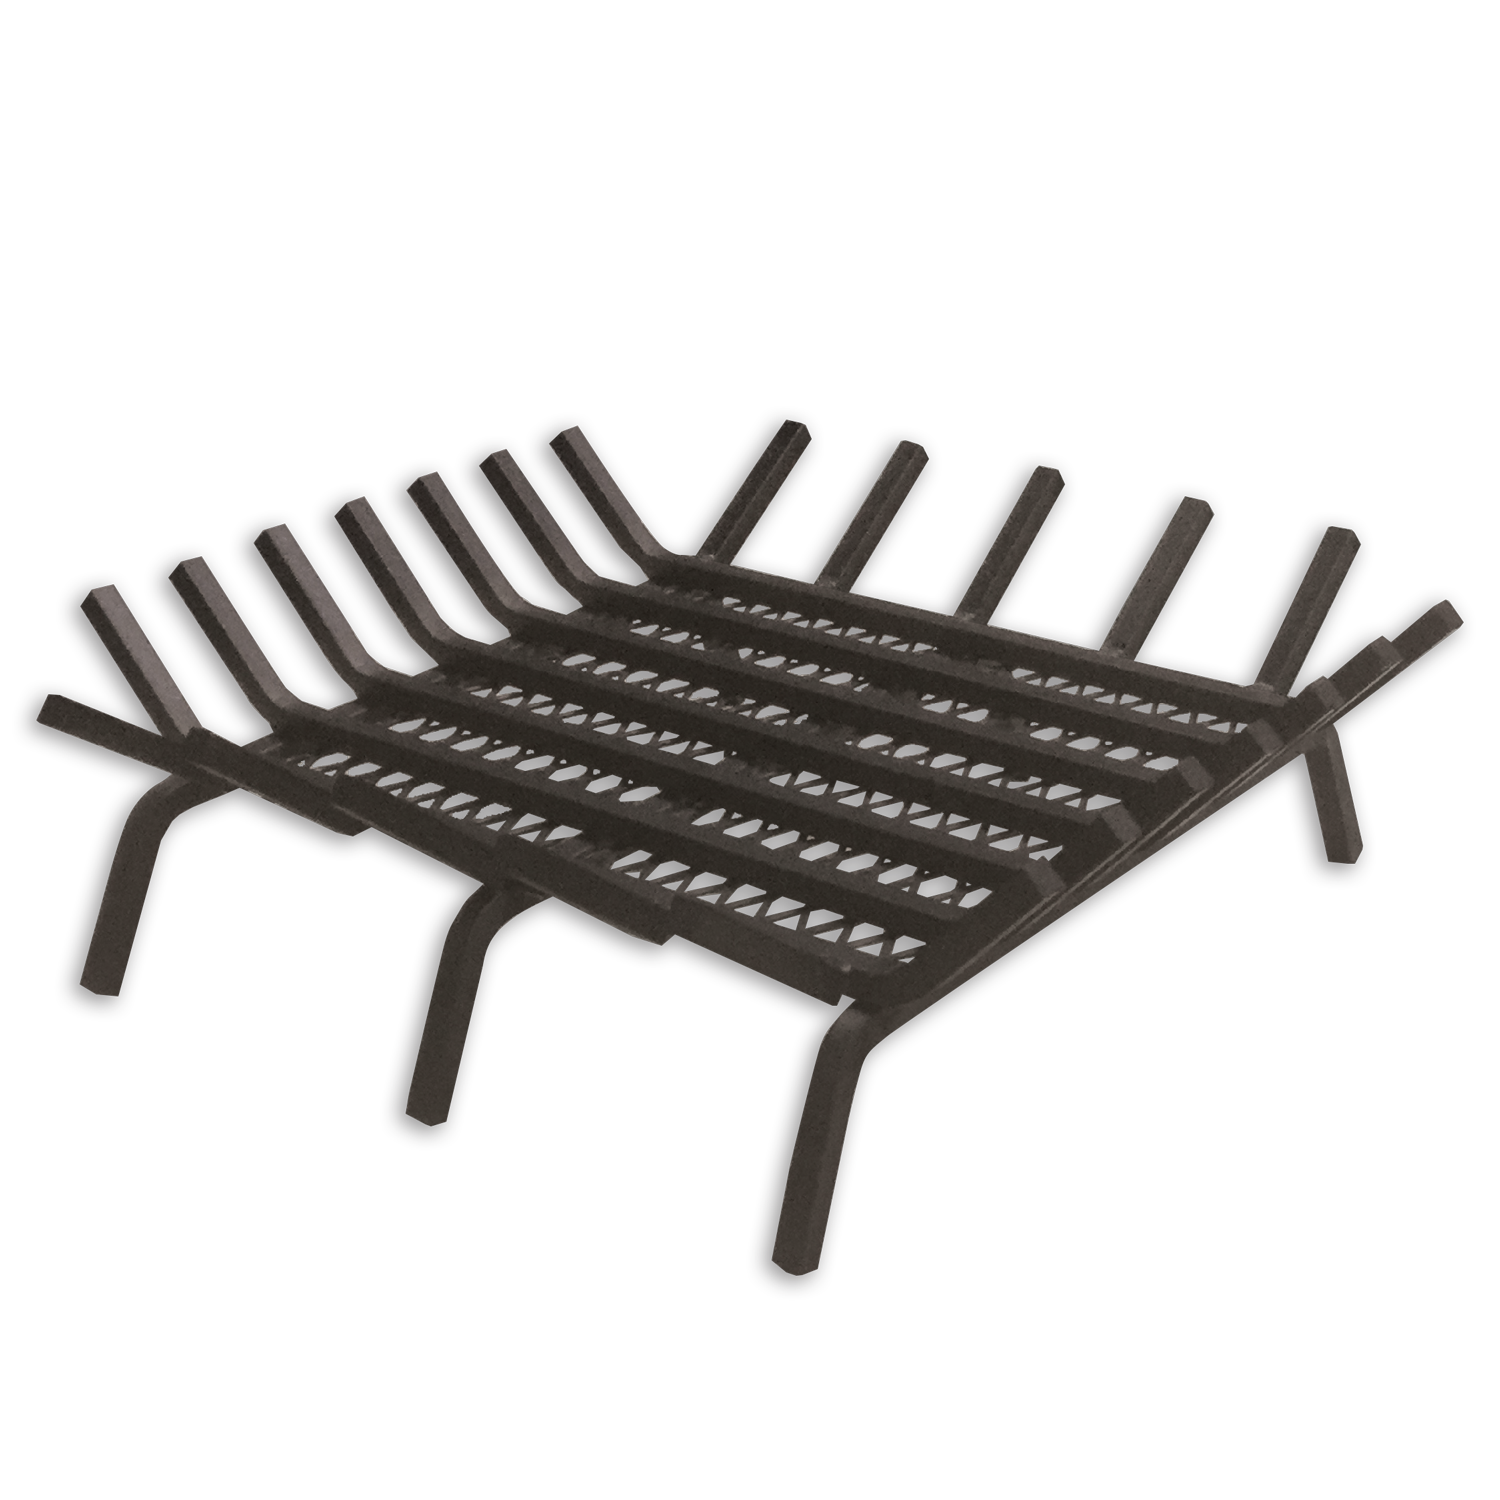 Square Rectangle Fire Pit Grate, How To Use Fire Pit Grate